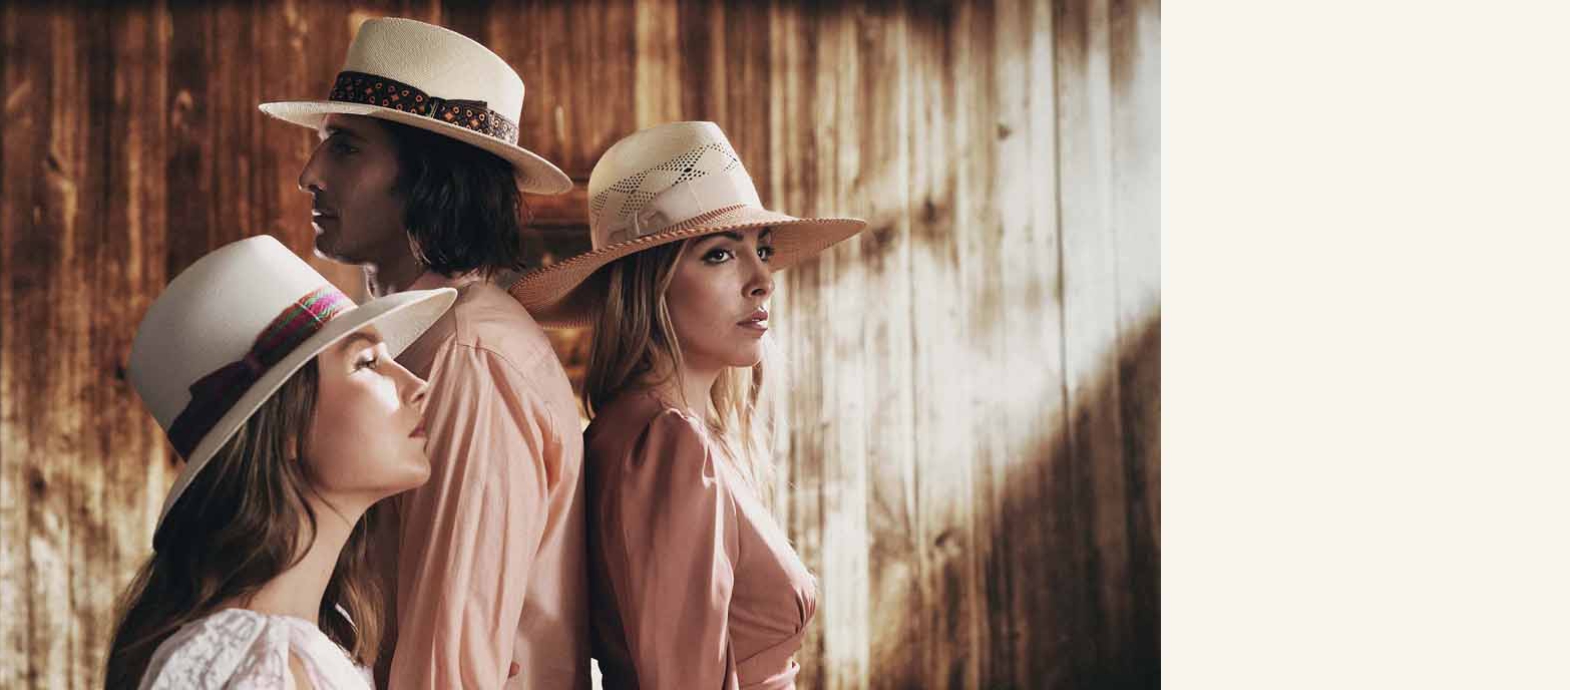 Airy Raffia hats and protective Panama hats from Borsalino have arrived.